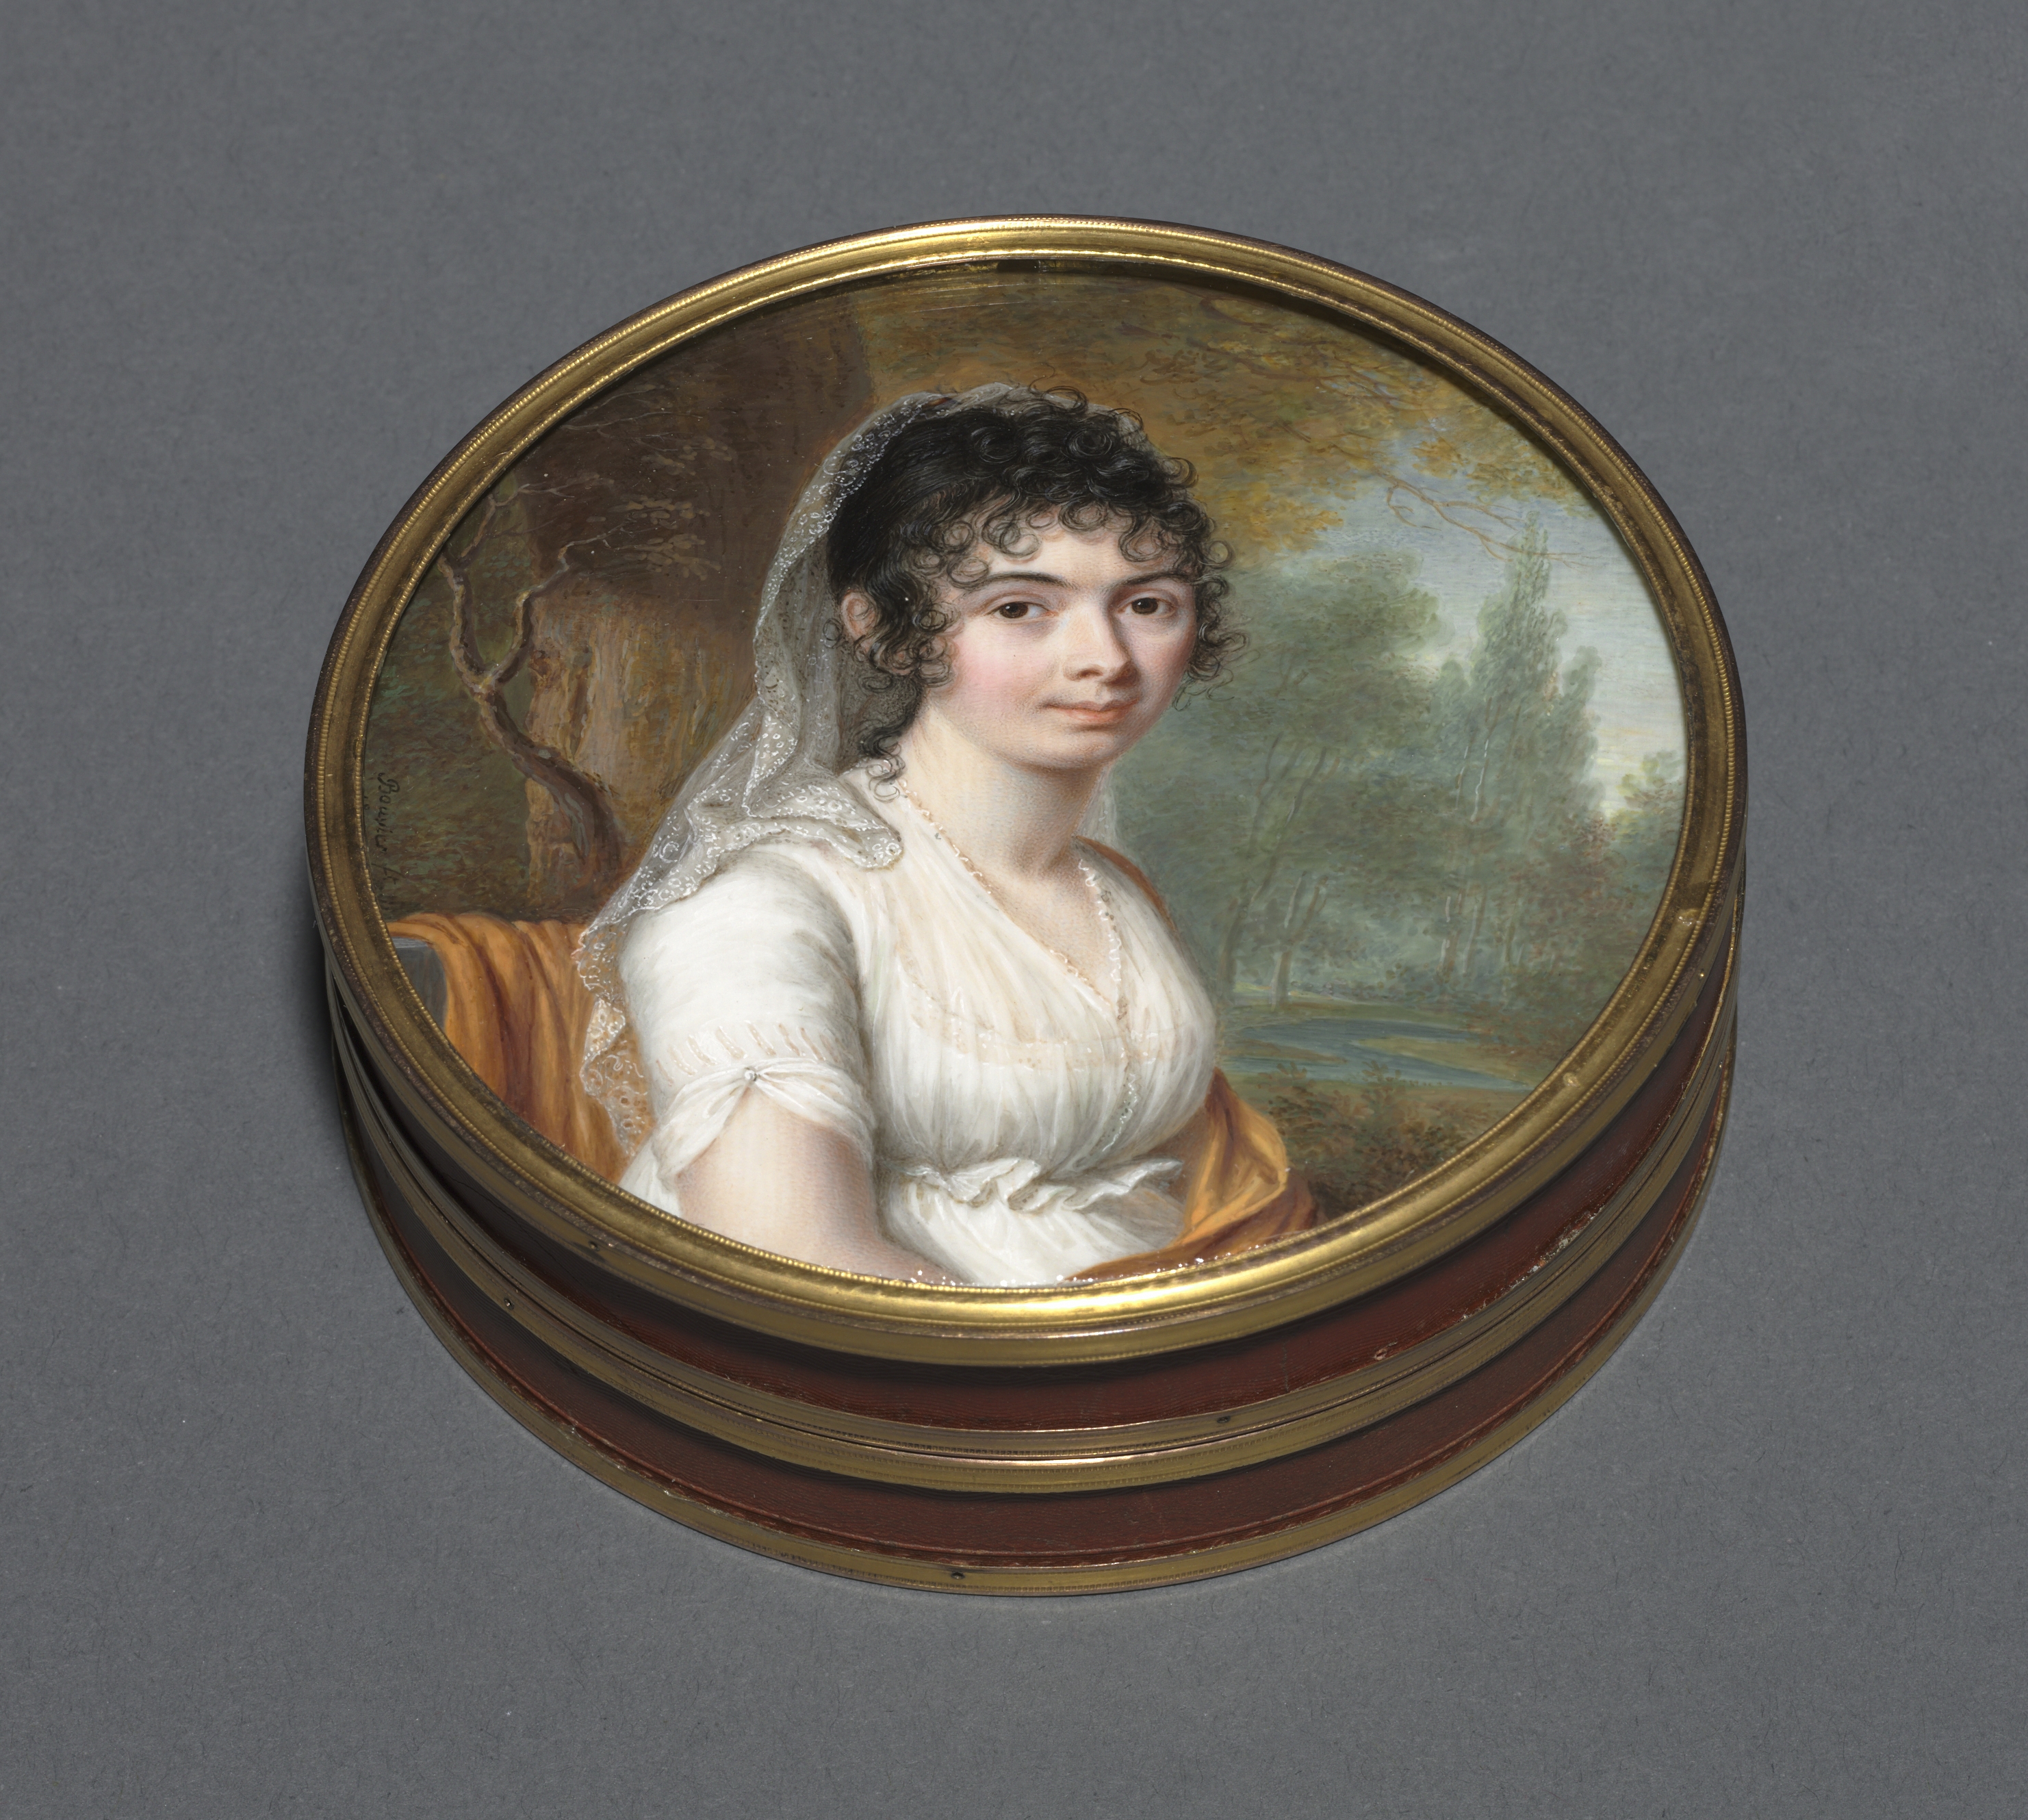 Snuff Box with a Portrait of a Lady